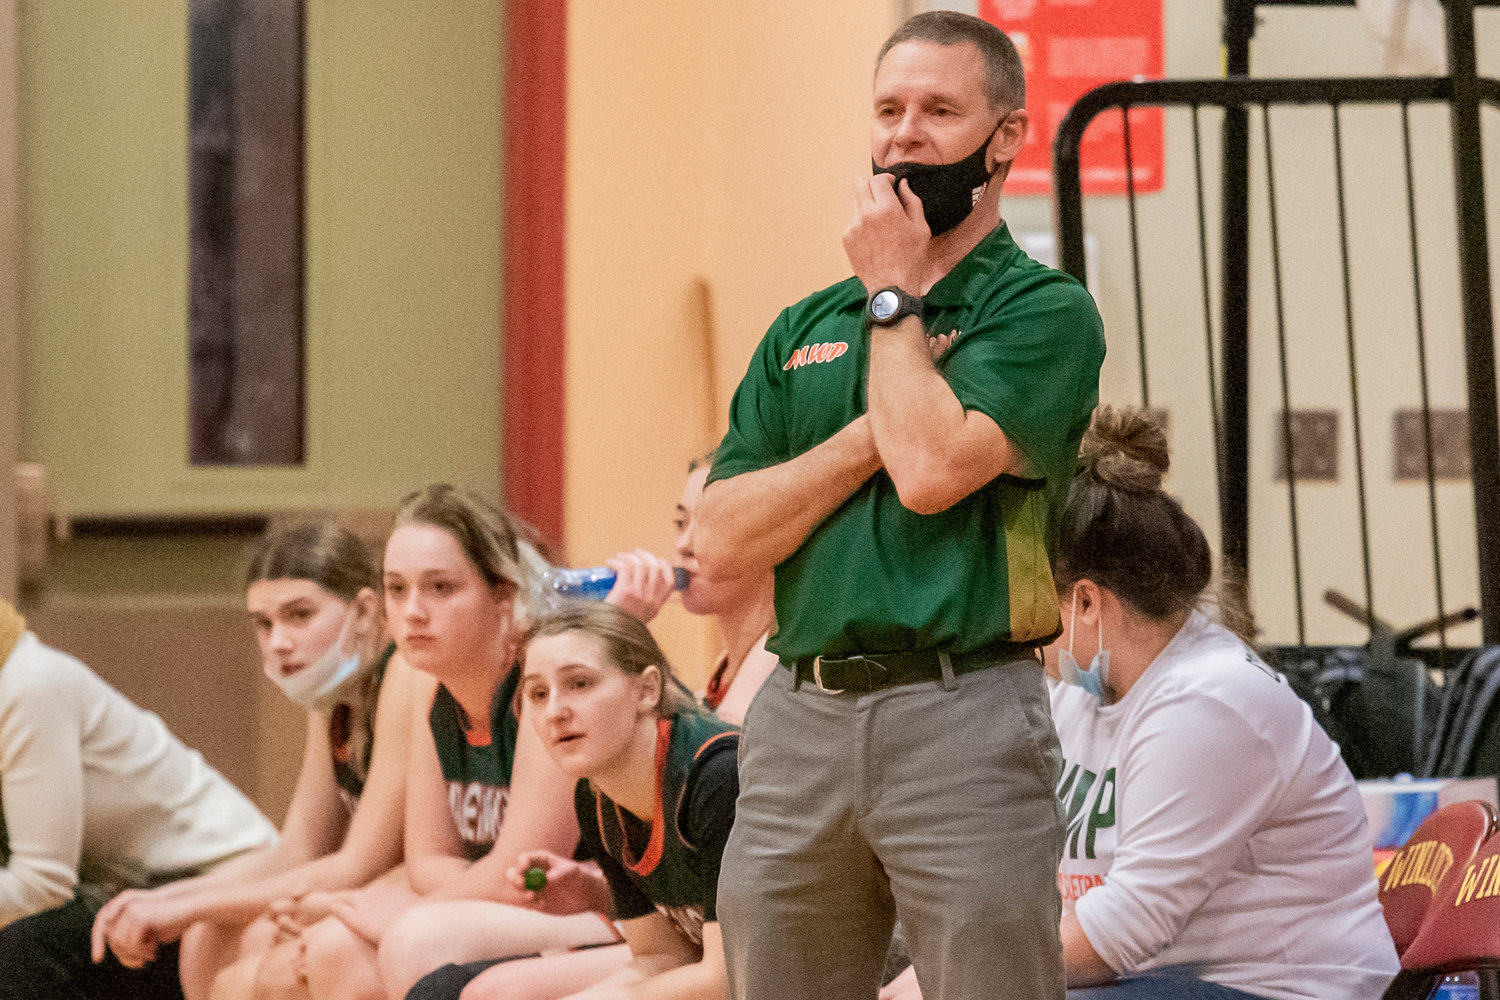 Morton-White Pass Head Coach Curt Atkinson watches courtside during a game Tuesday night as athletes play in Winlock.